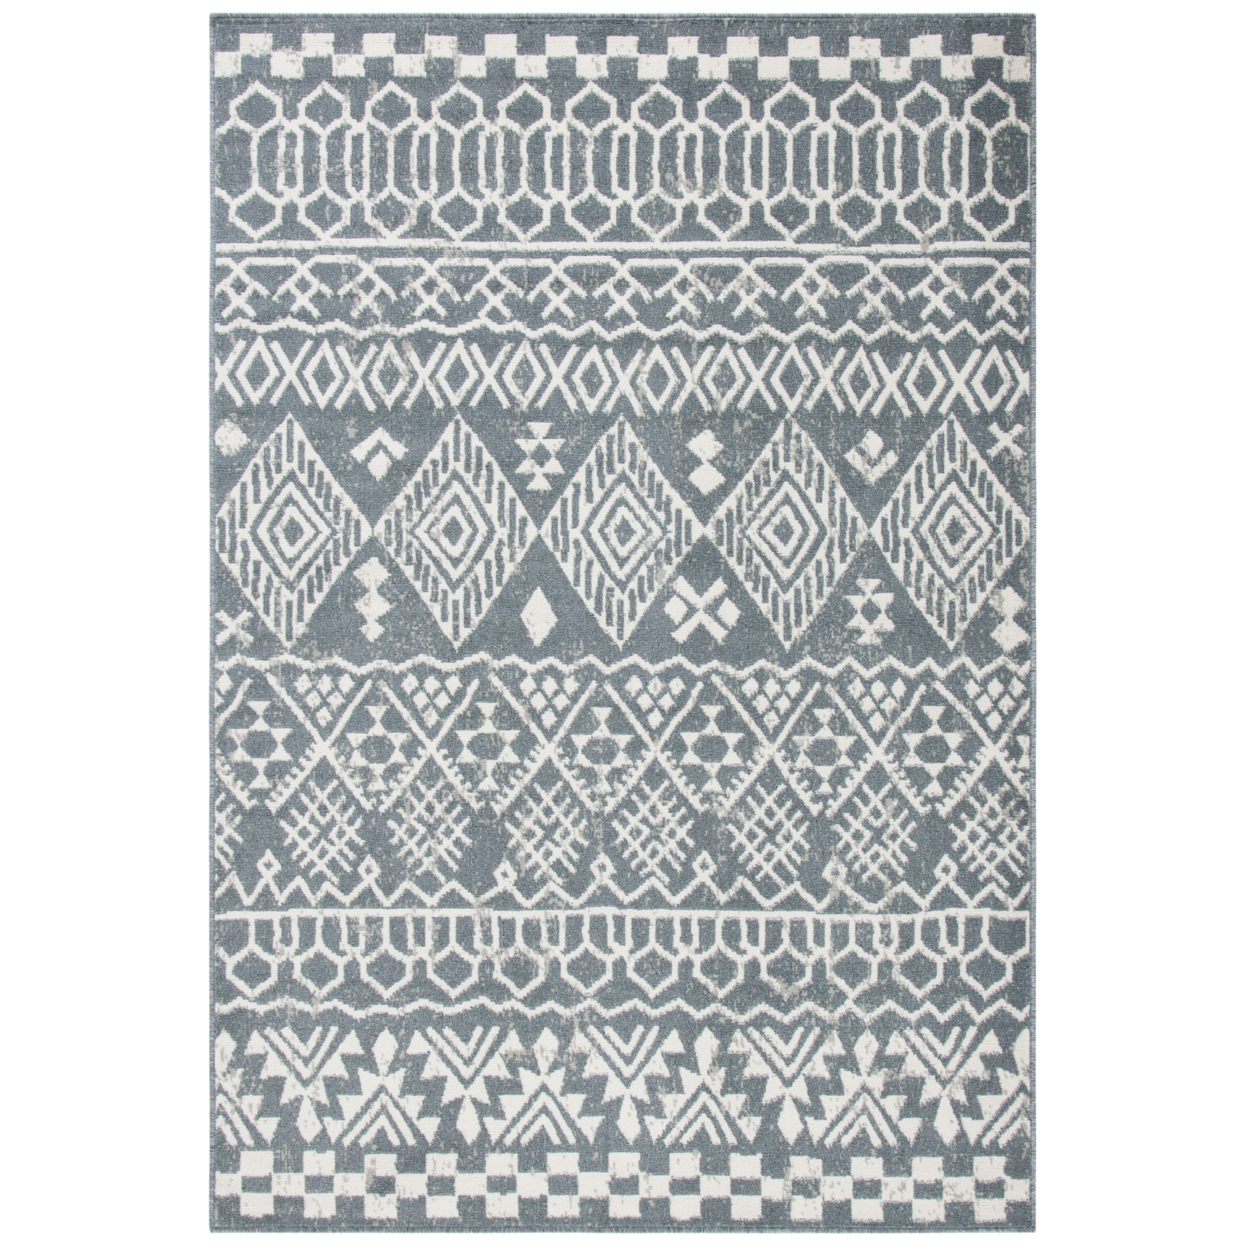 SAFAVIEH Pyramid Collection PYR205A Ivory / Charcoal Rug - 6-7 X 6-7 Round